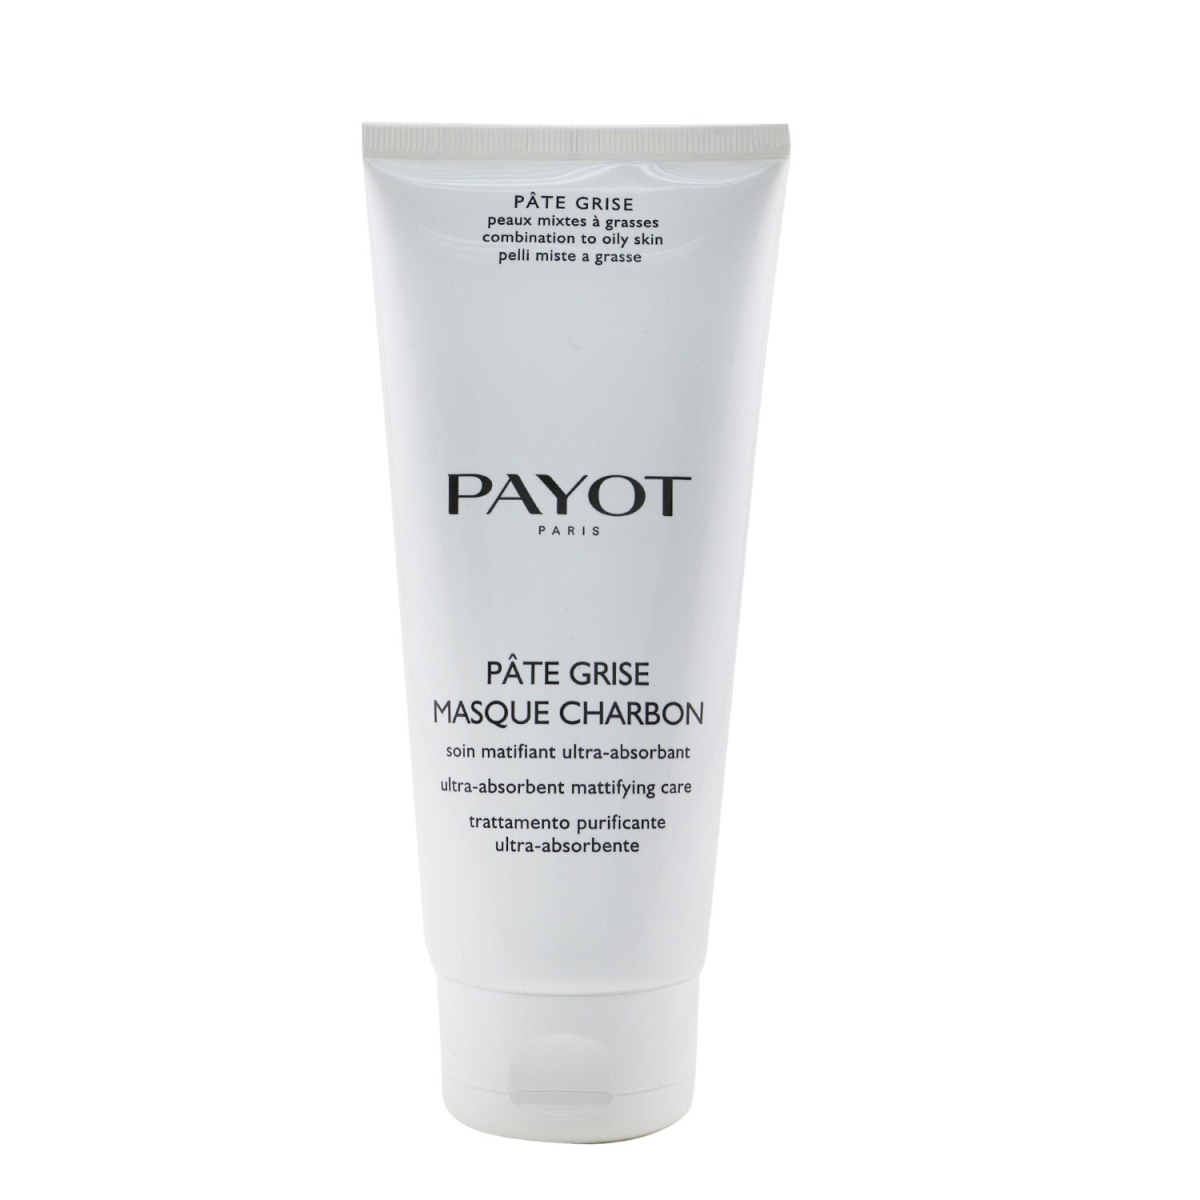 Picture of Payot 263944 6.7 oz Pate Grise Masque Charbon Ultra-Absorbent Salon Size Mattifying Care